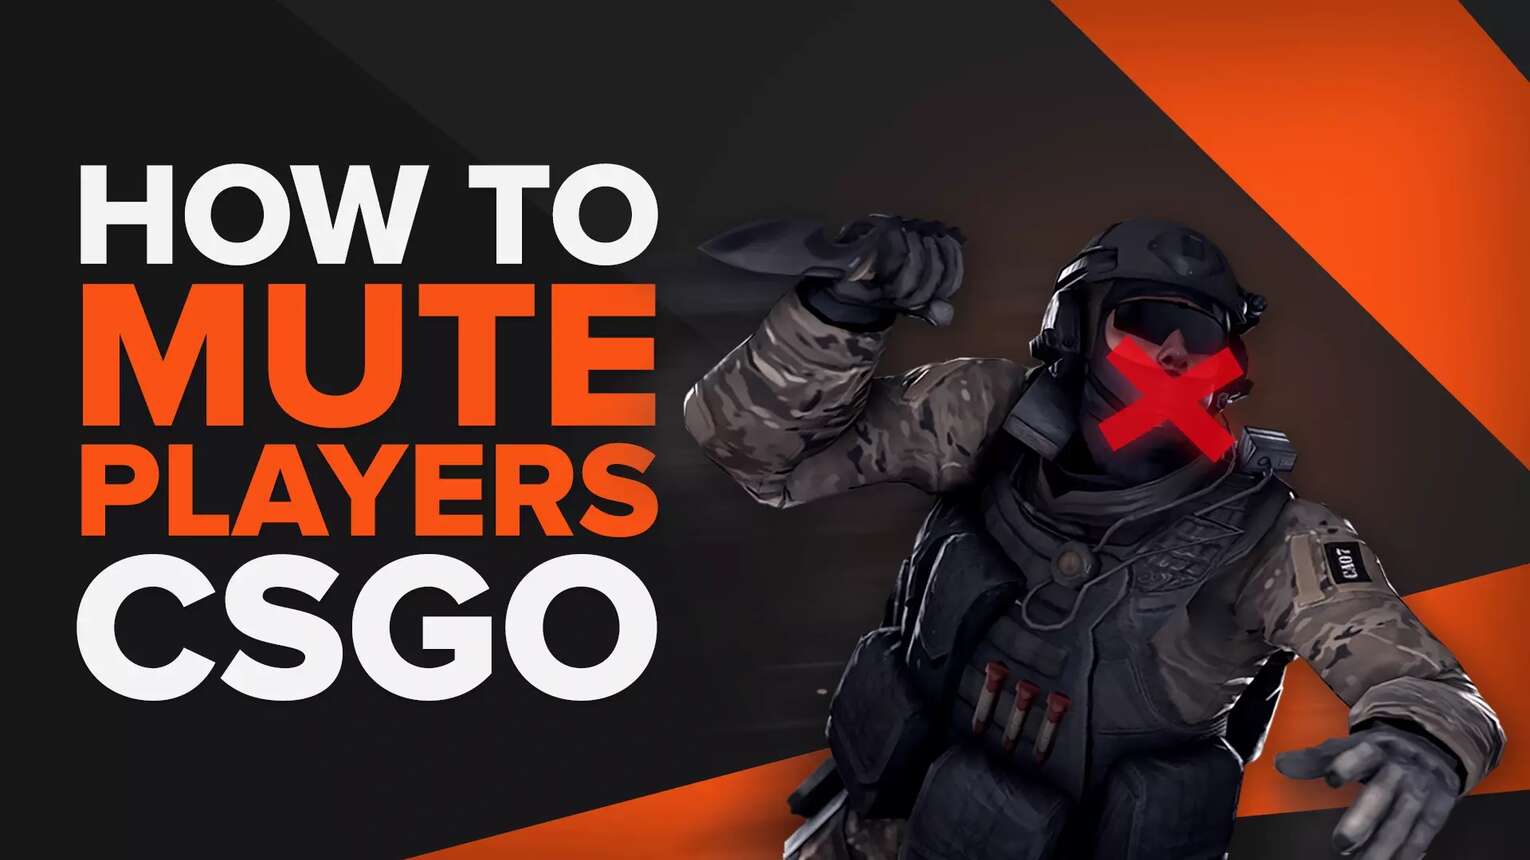 How to Mute Players in Counter-Strike 2